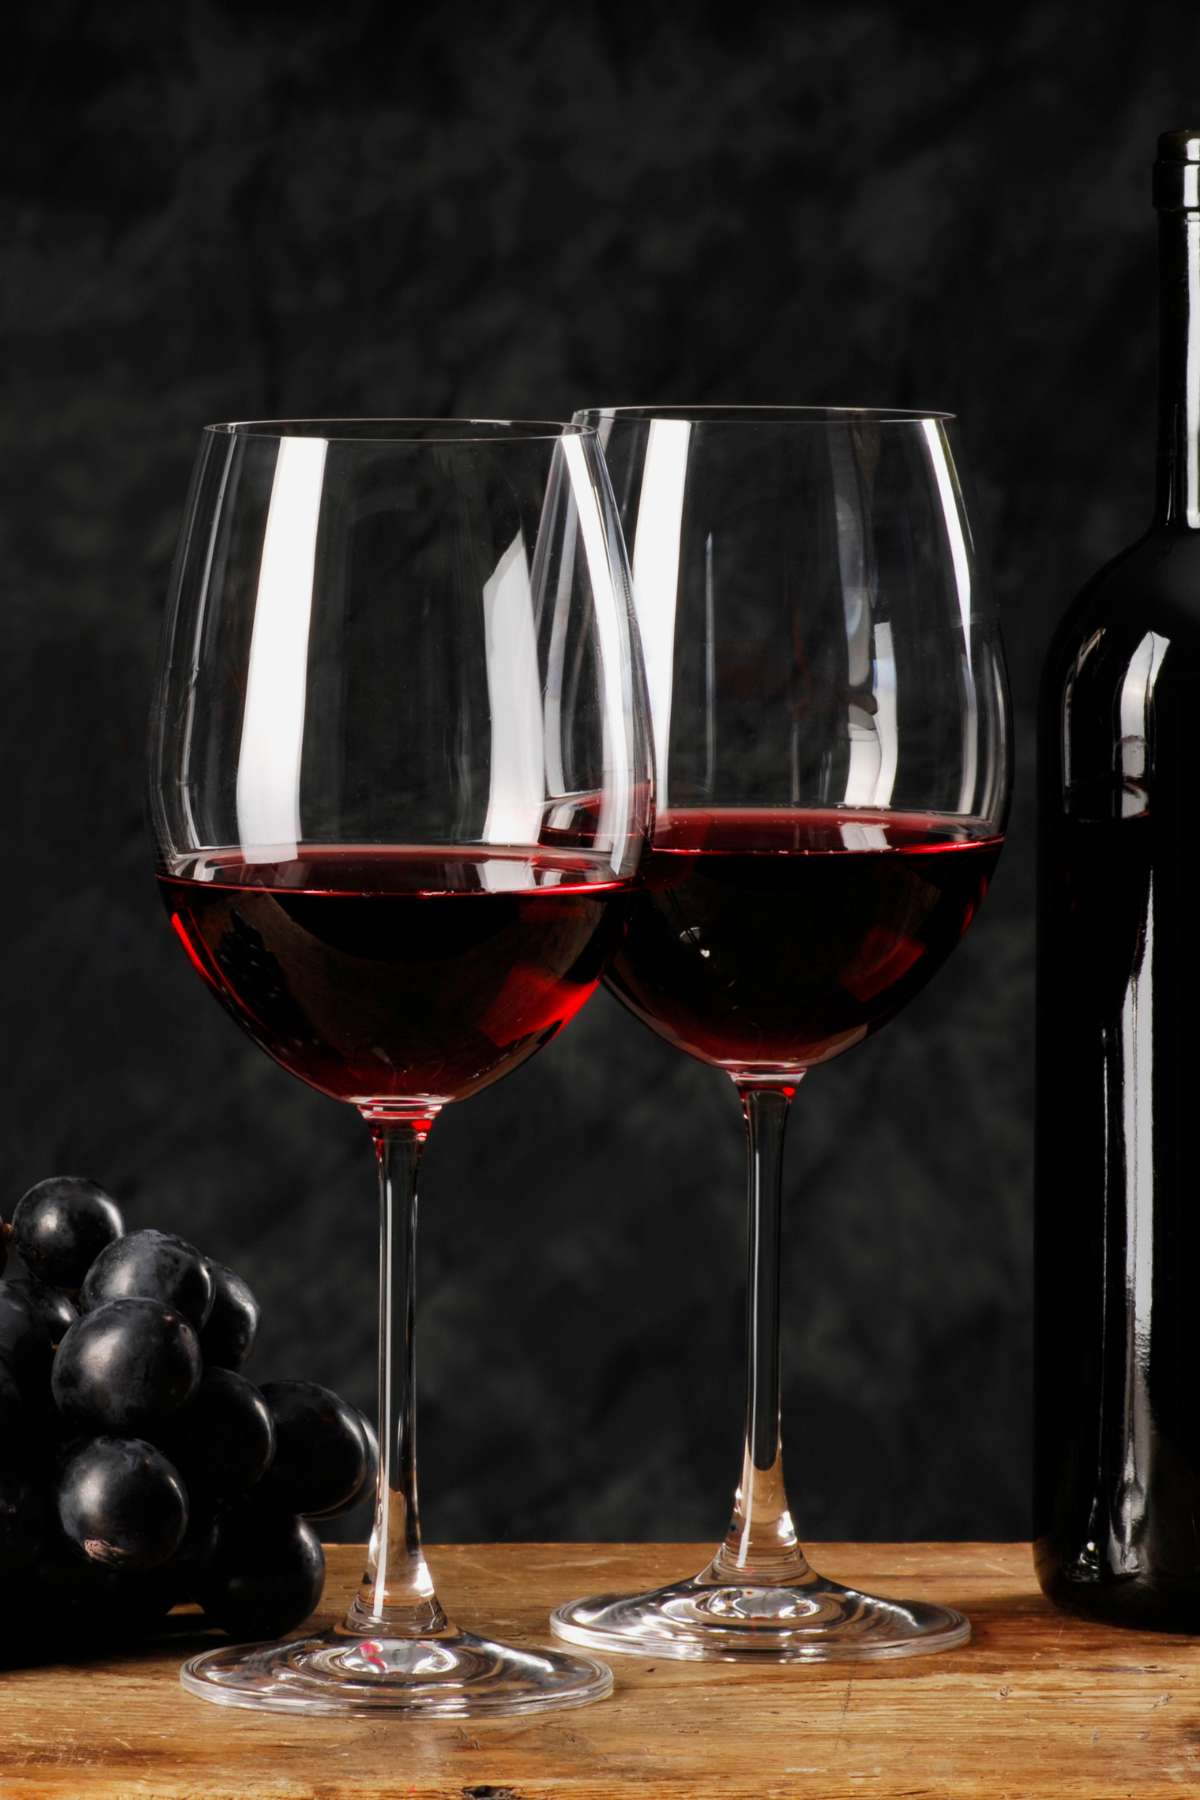 Ever wonder how many carbs are in red wine? Is it keto? In this post, we’re covering everything you need to know about having red wine on keto, including carb count and the best types of wine to keep you on track with your health goals.